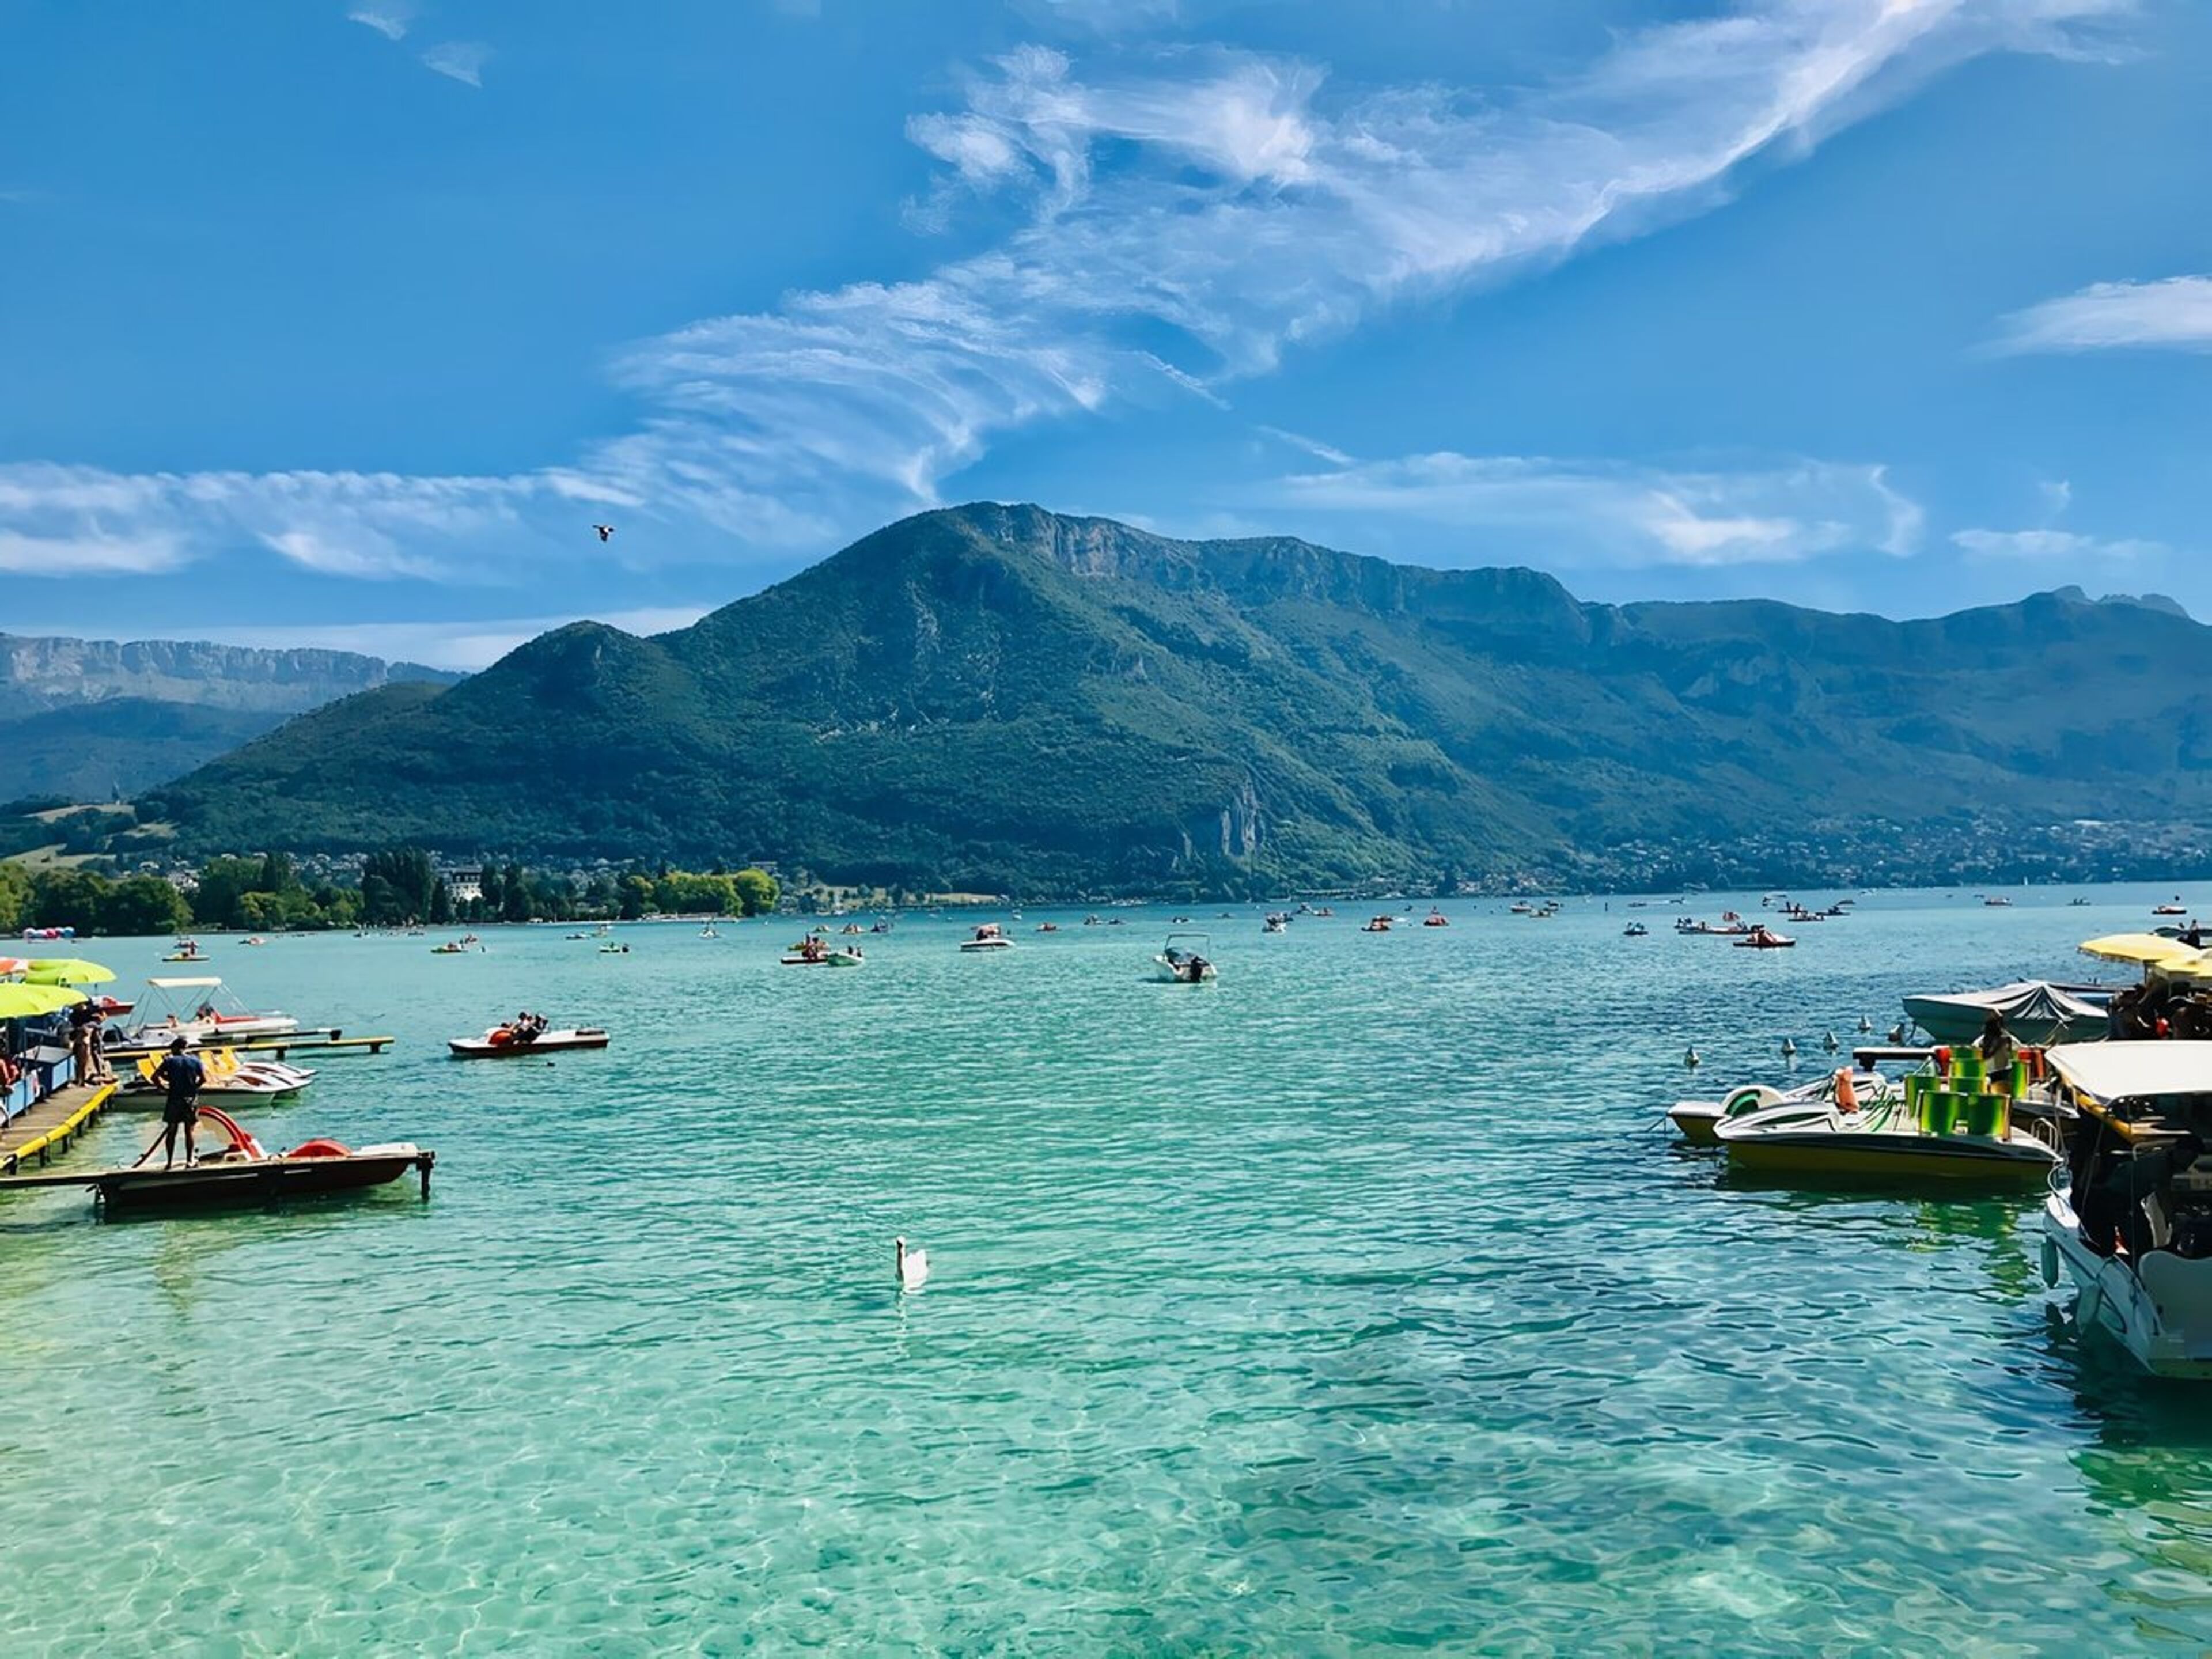 Swimming on holiday in Lake Annecy 